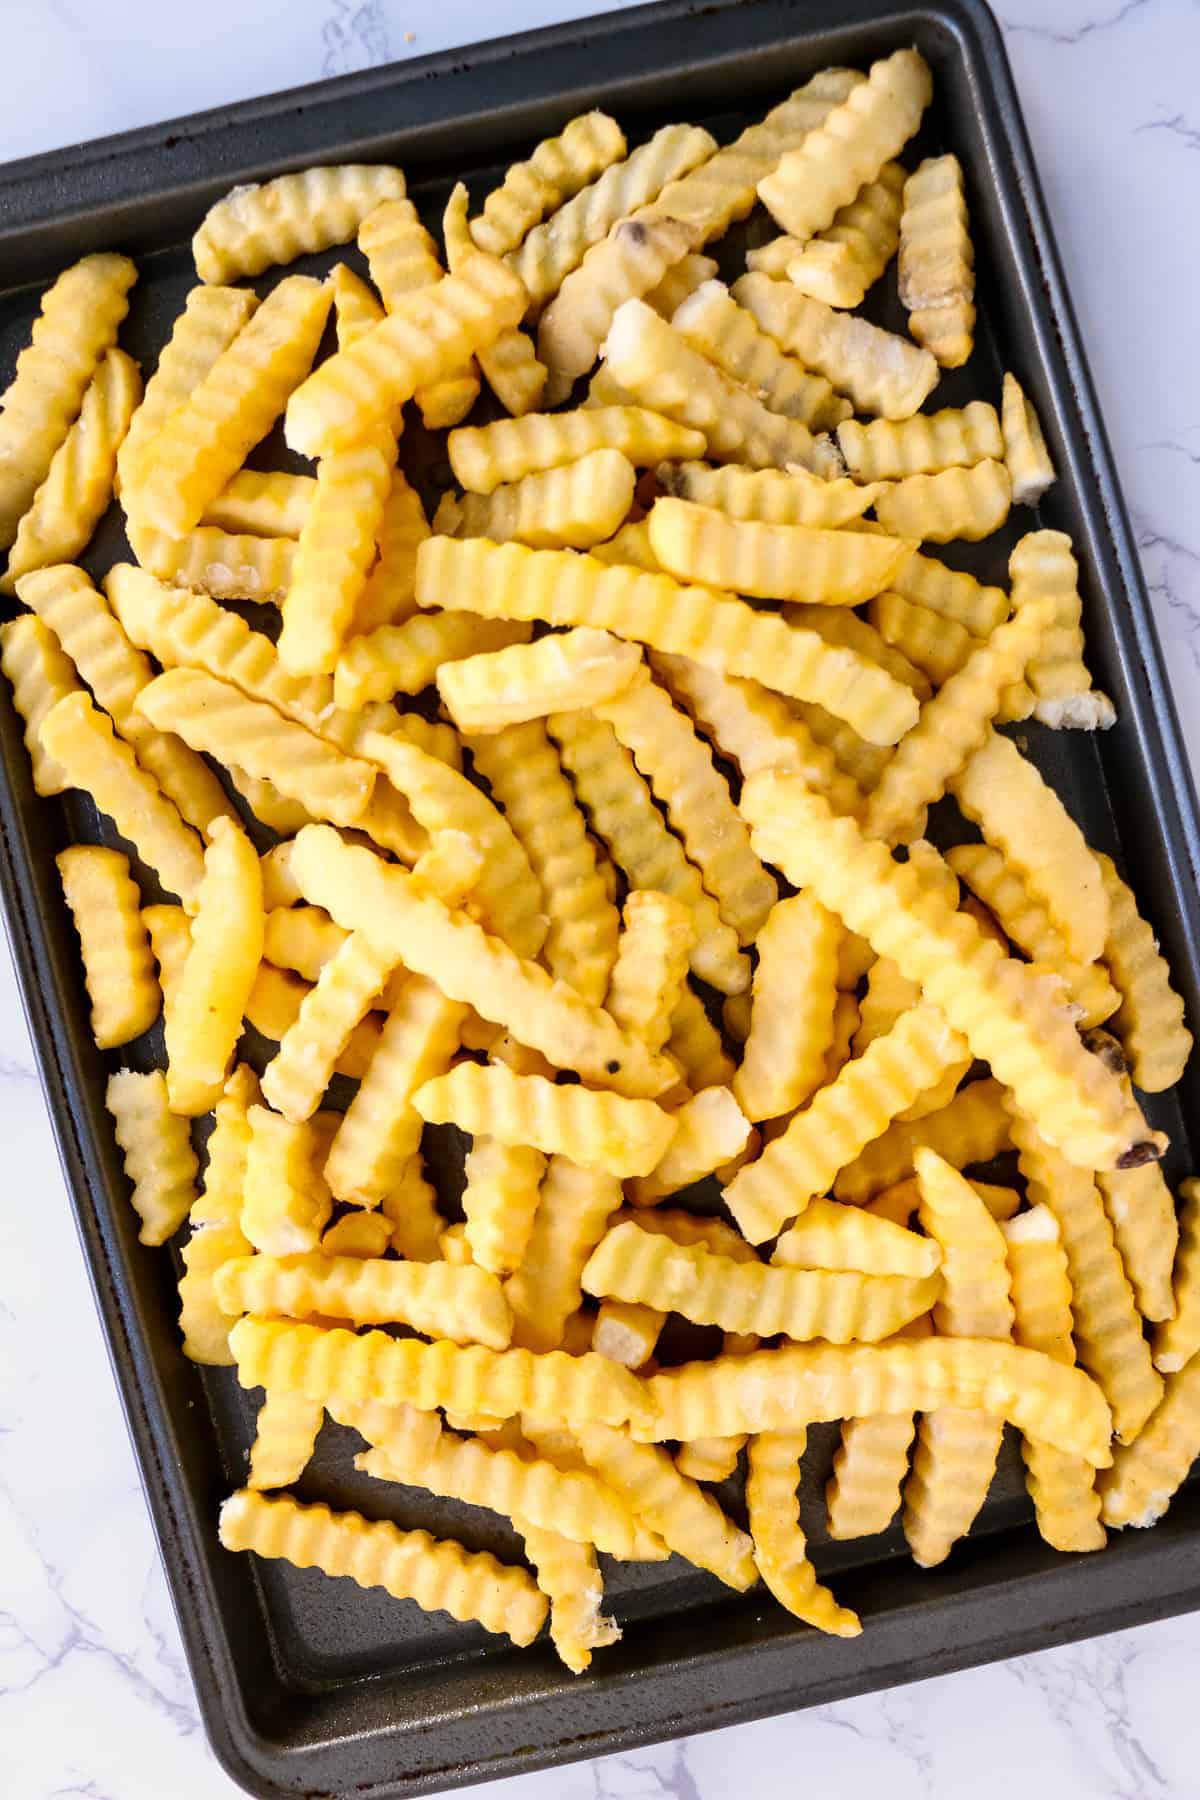 Sheet pan with frozen french fries on it